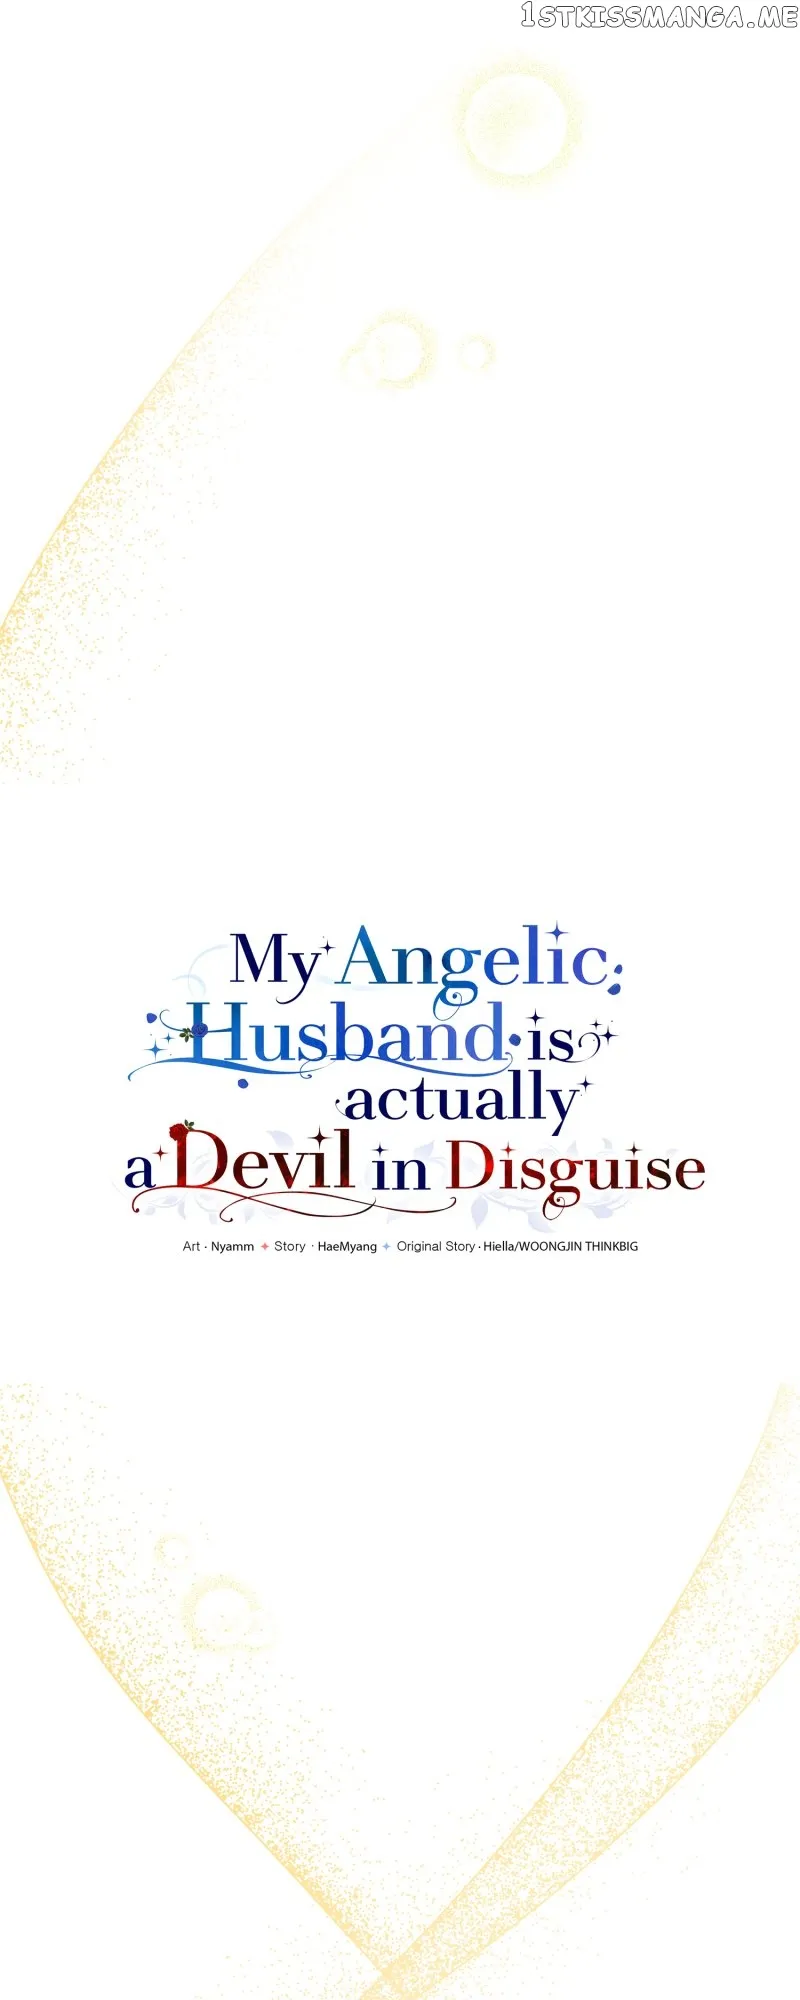 My Angelic Husband is actually a Devil in Disguise chapter 2